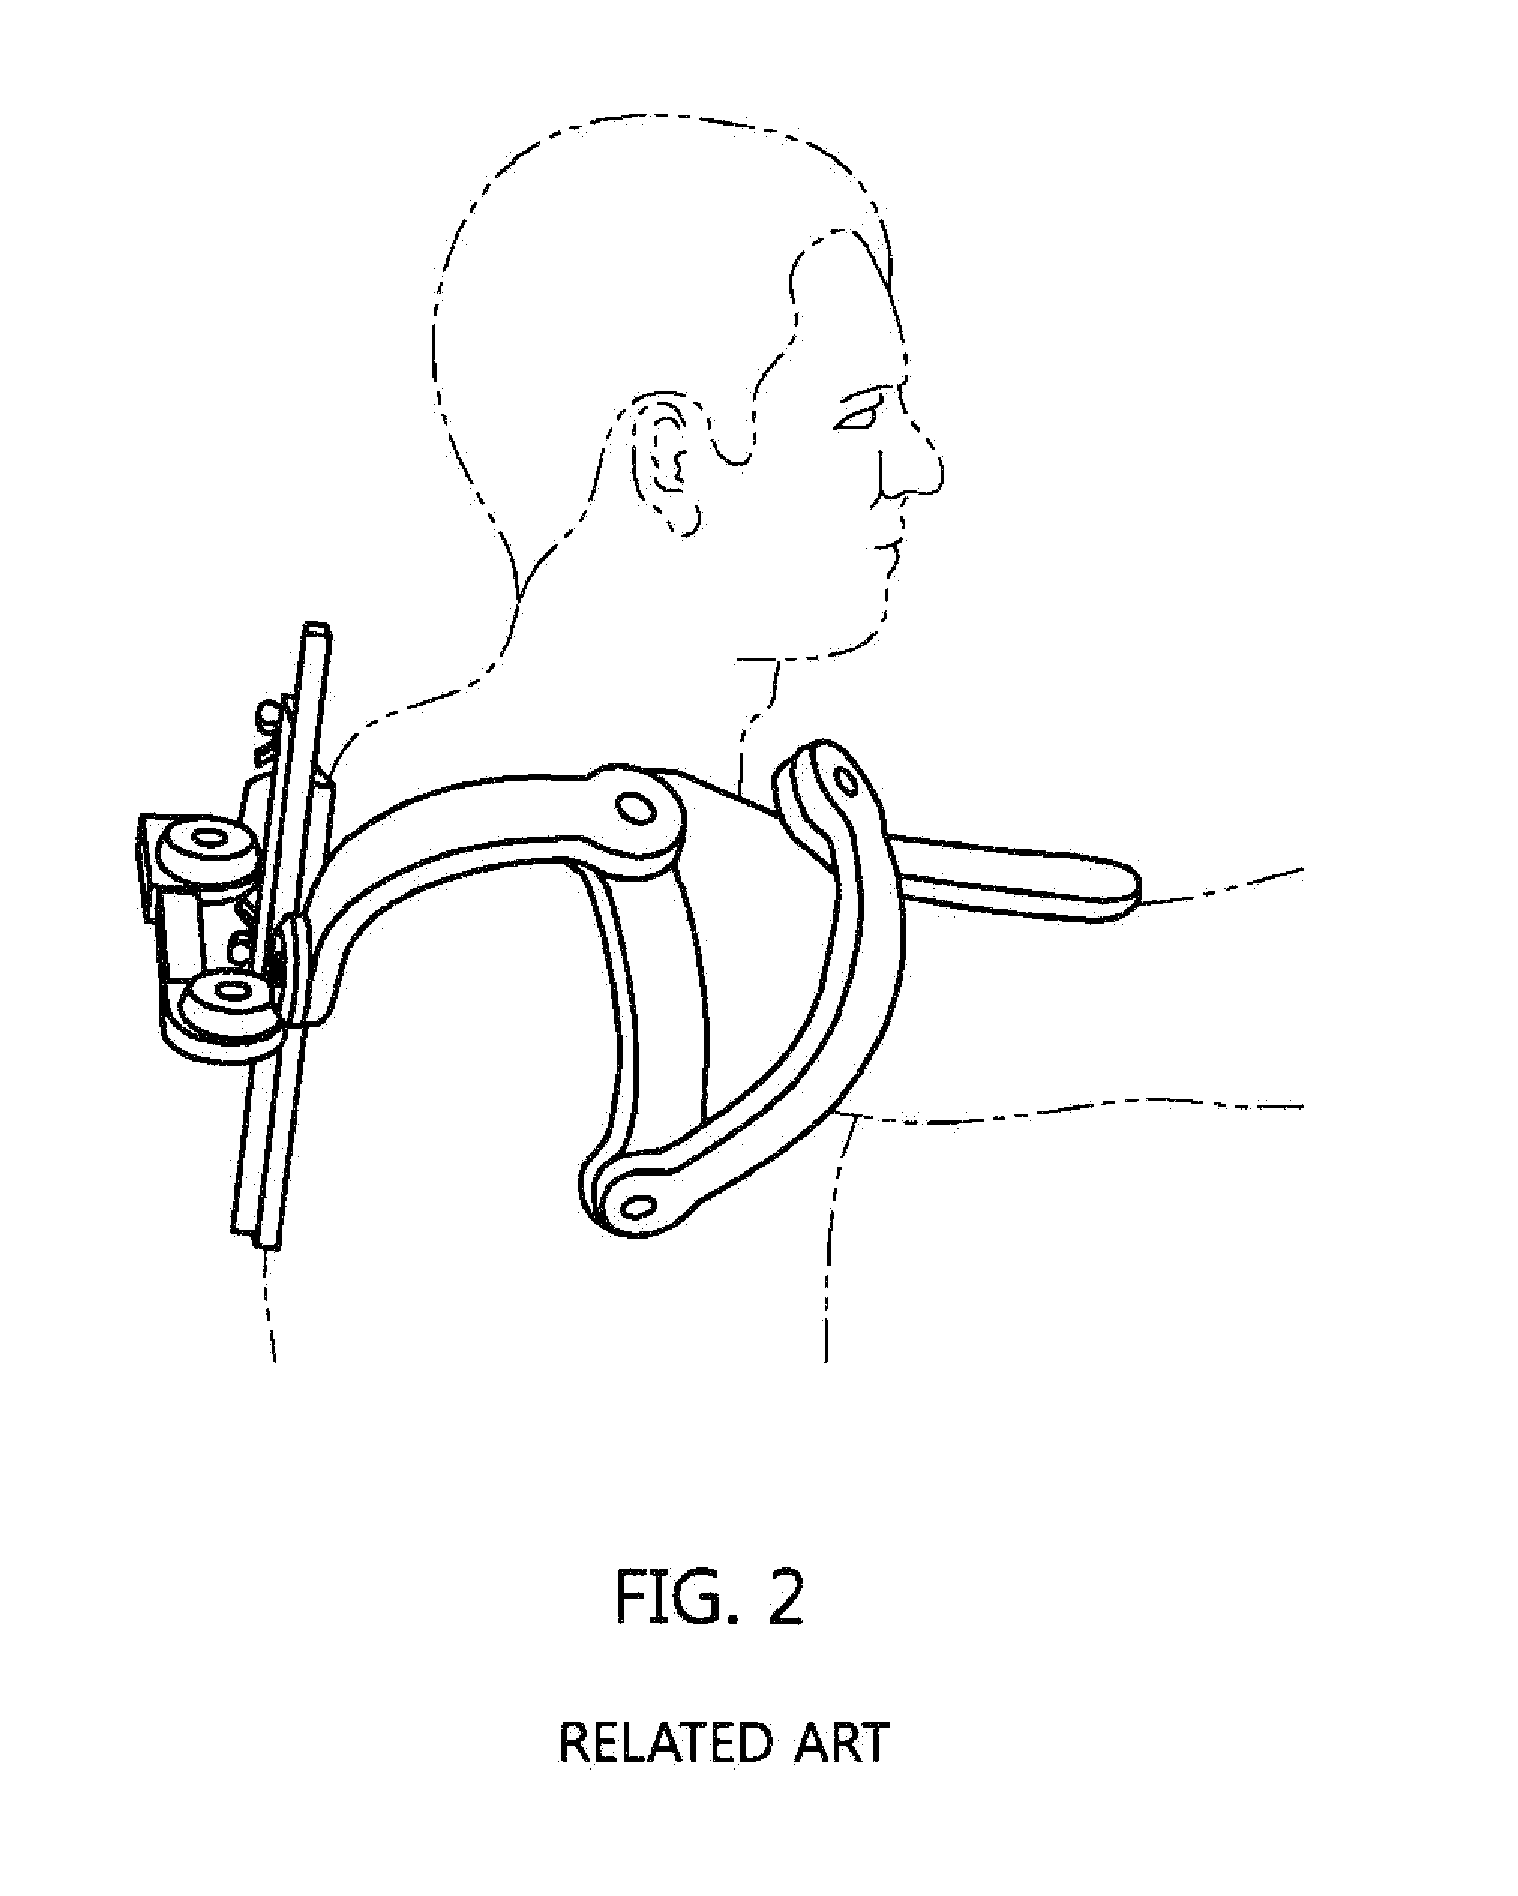 Wearable apparatus for measuring position and action of arm